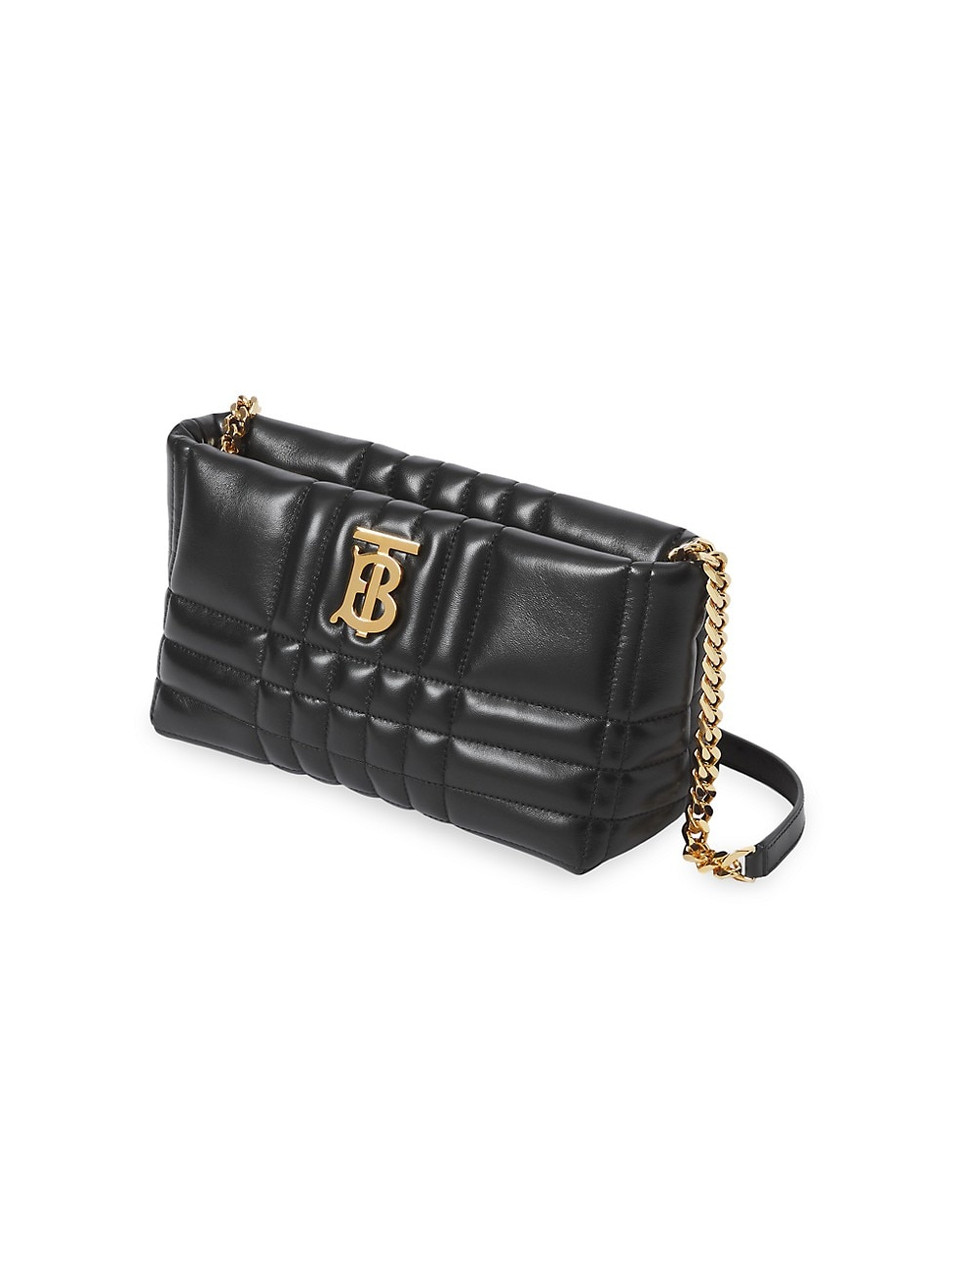 Burberry Lola Quilted Leather Crossbody Bag Black